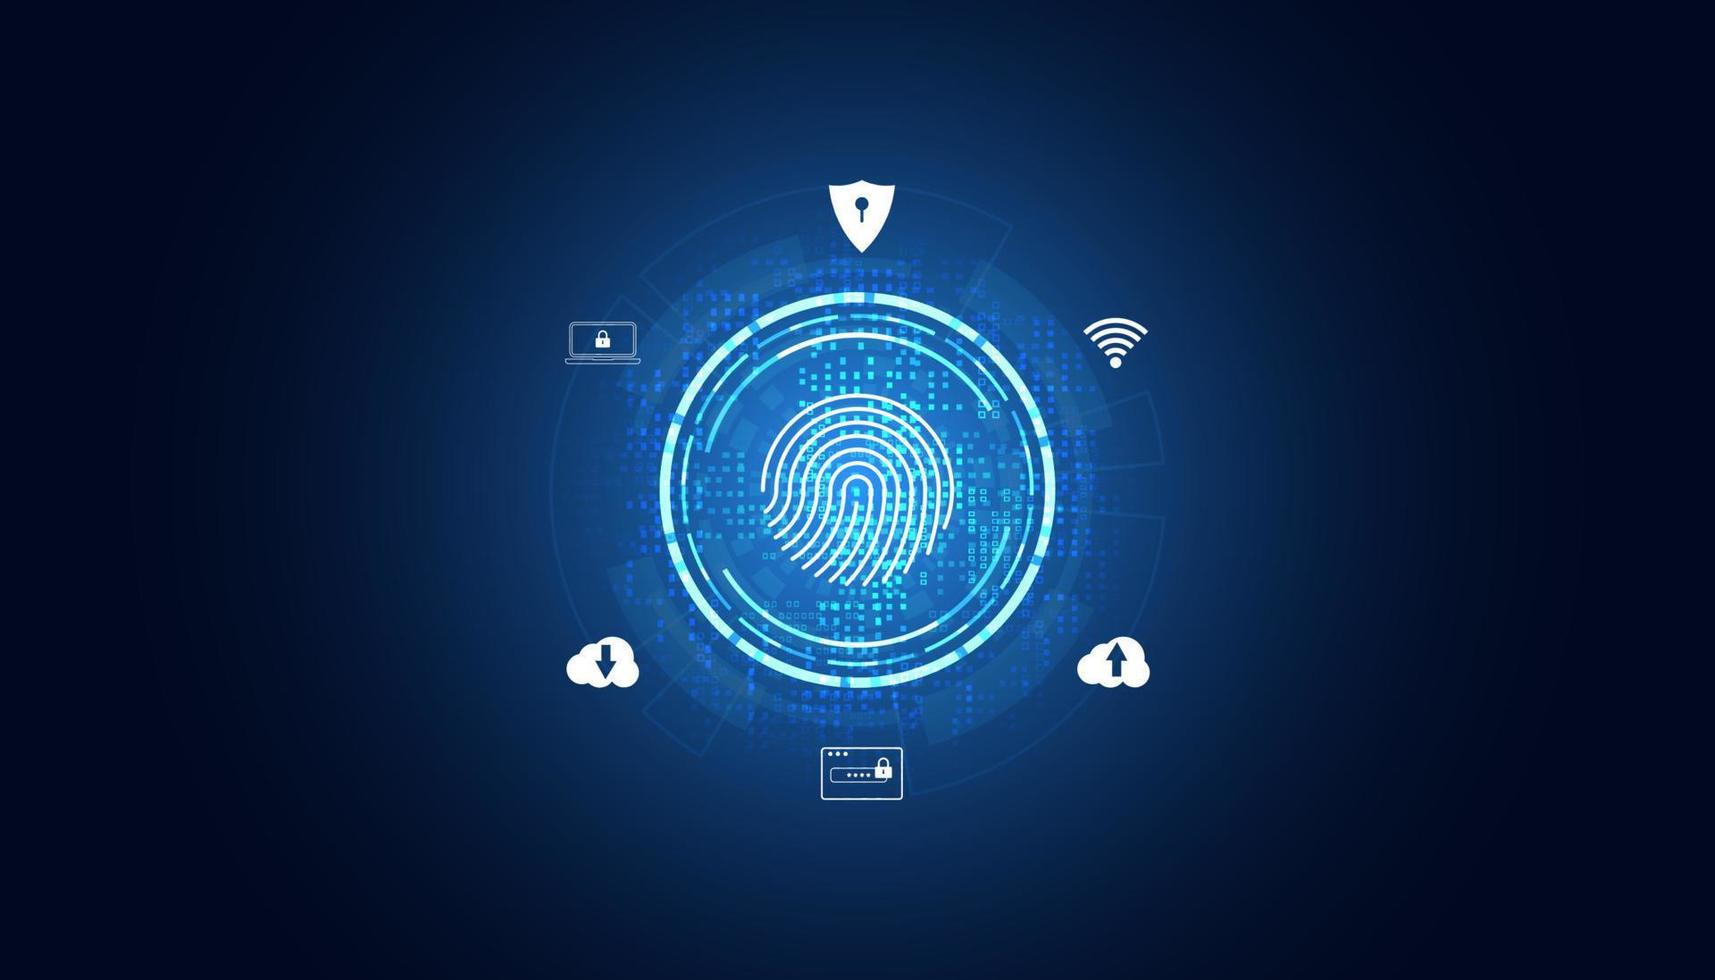 Abstract Fingerprint Scanning Encryption to login Cyber security icons on blue background modern futuristic vector